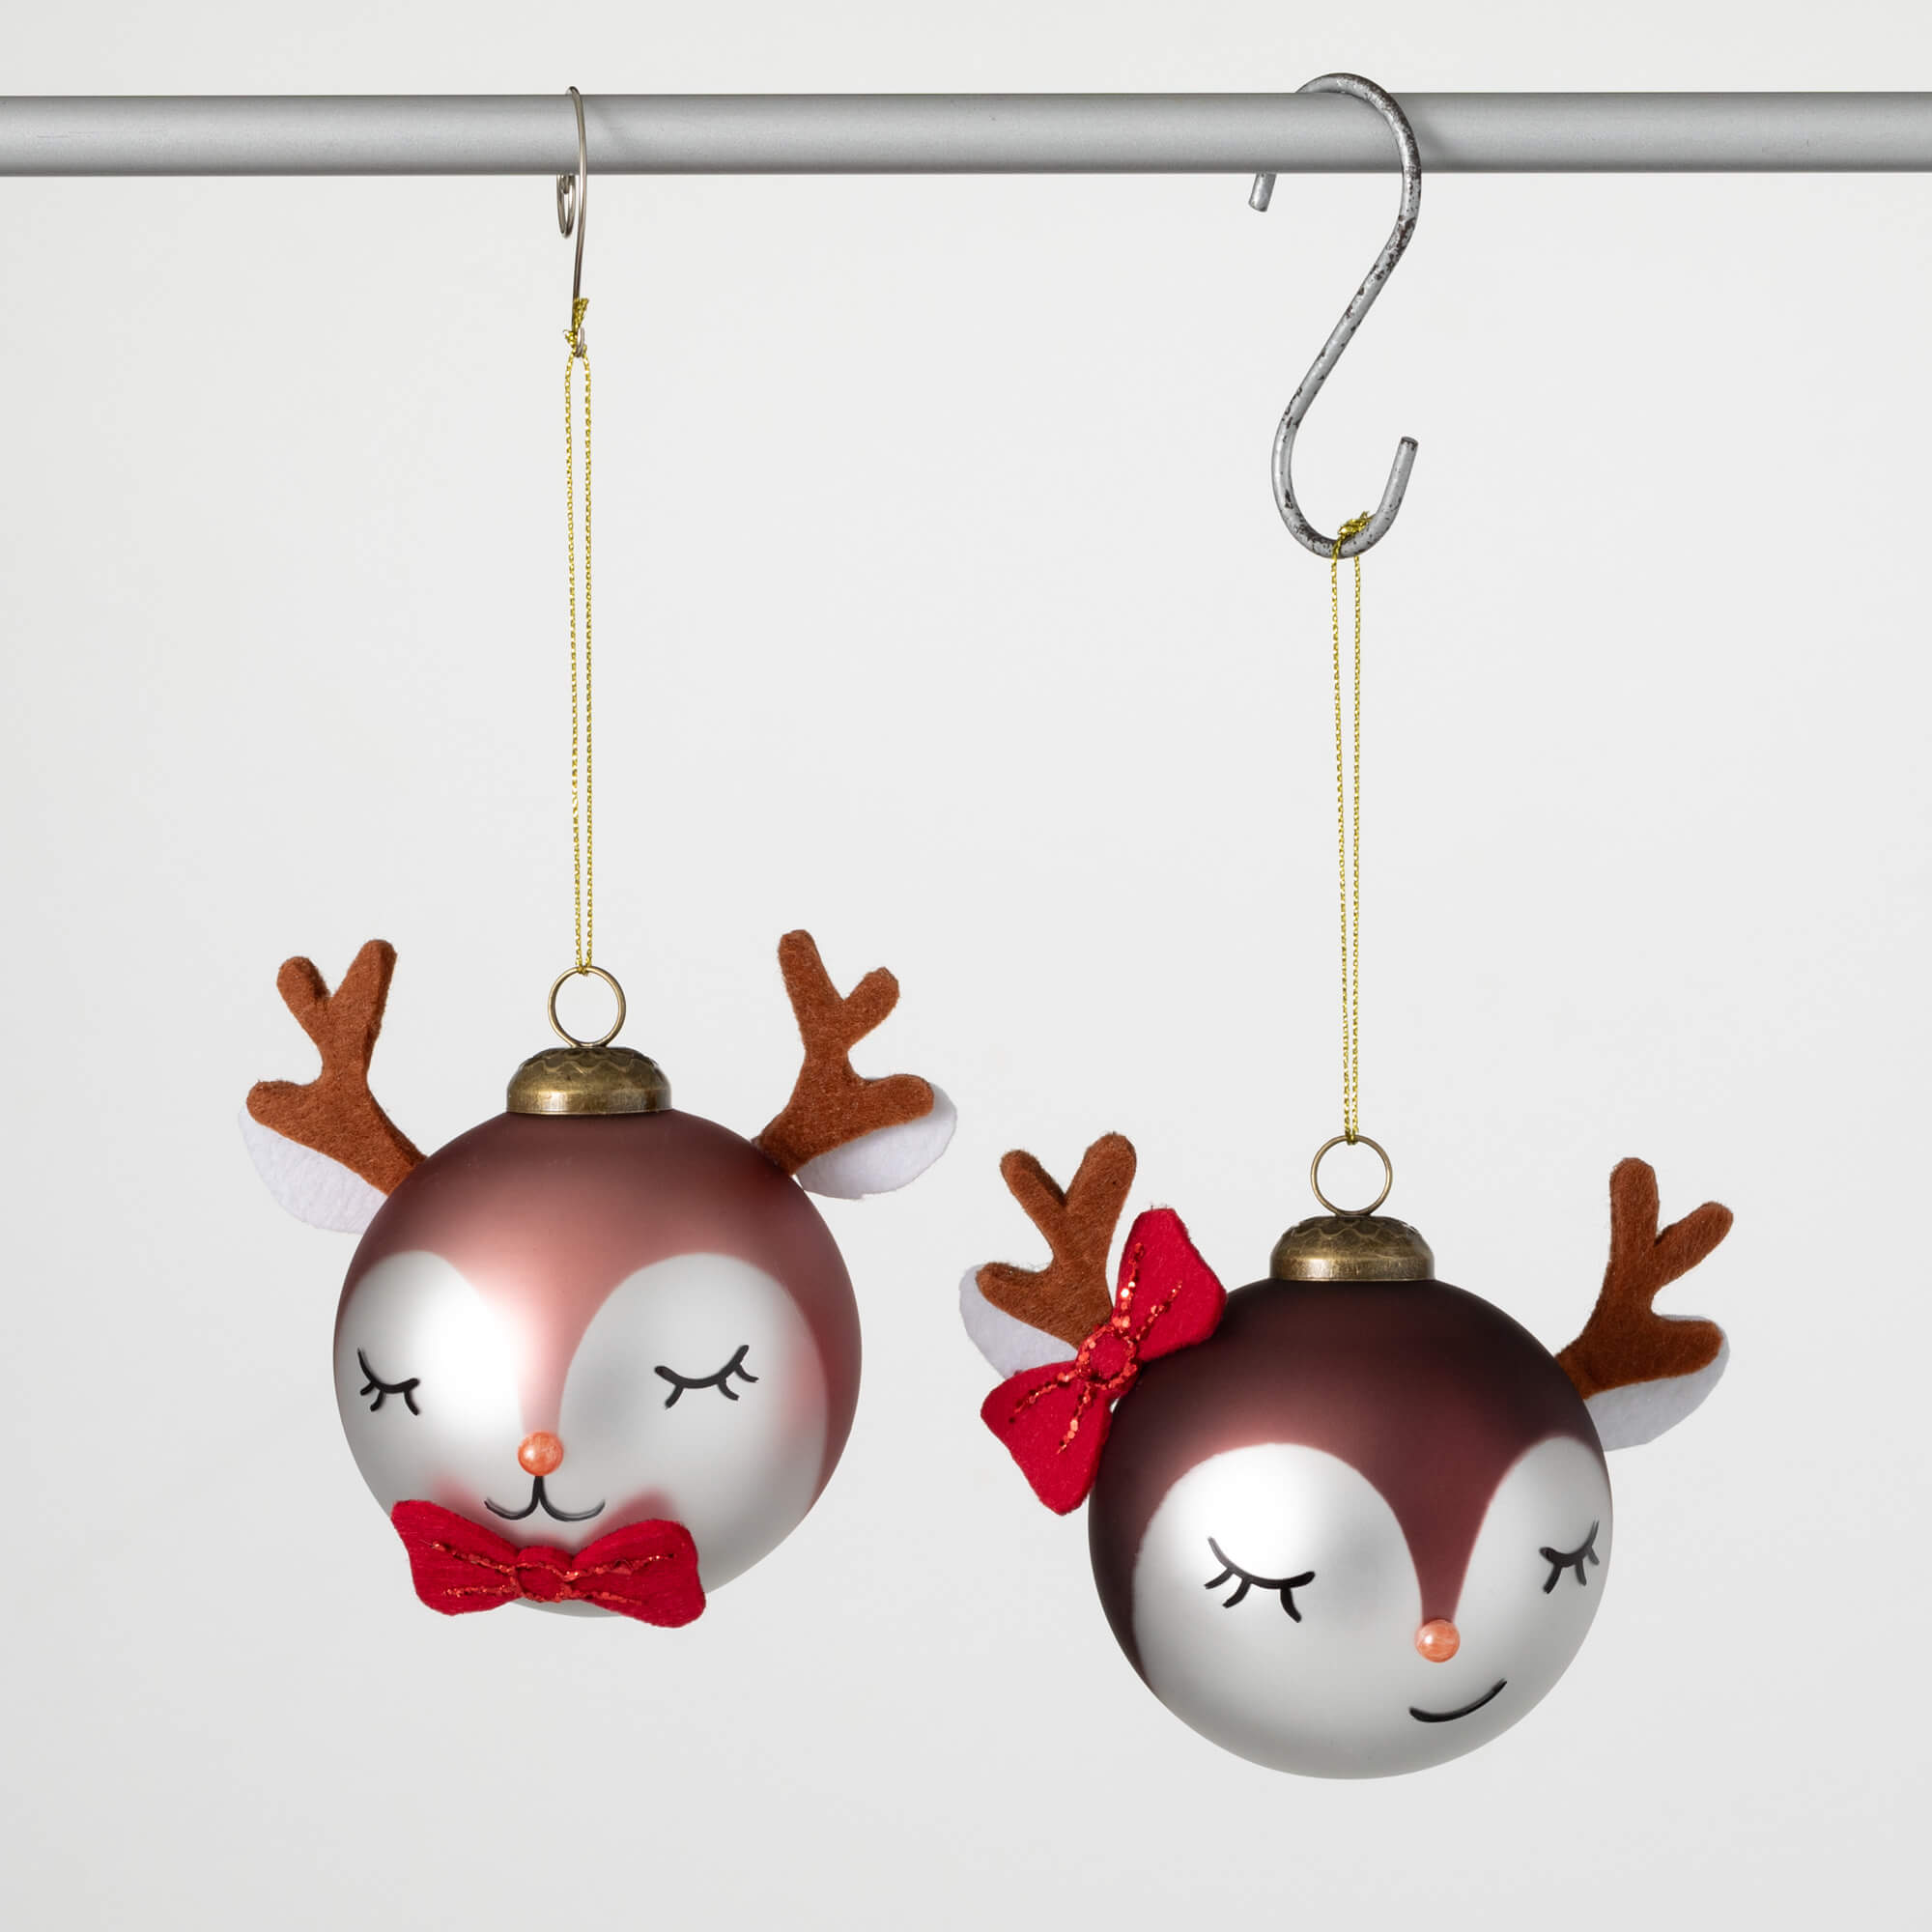 WHIMSY REINDEER BALL ORNAMENTS